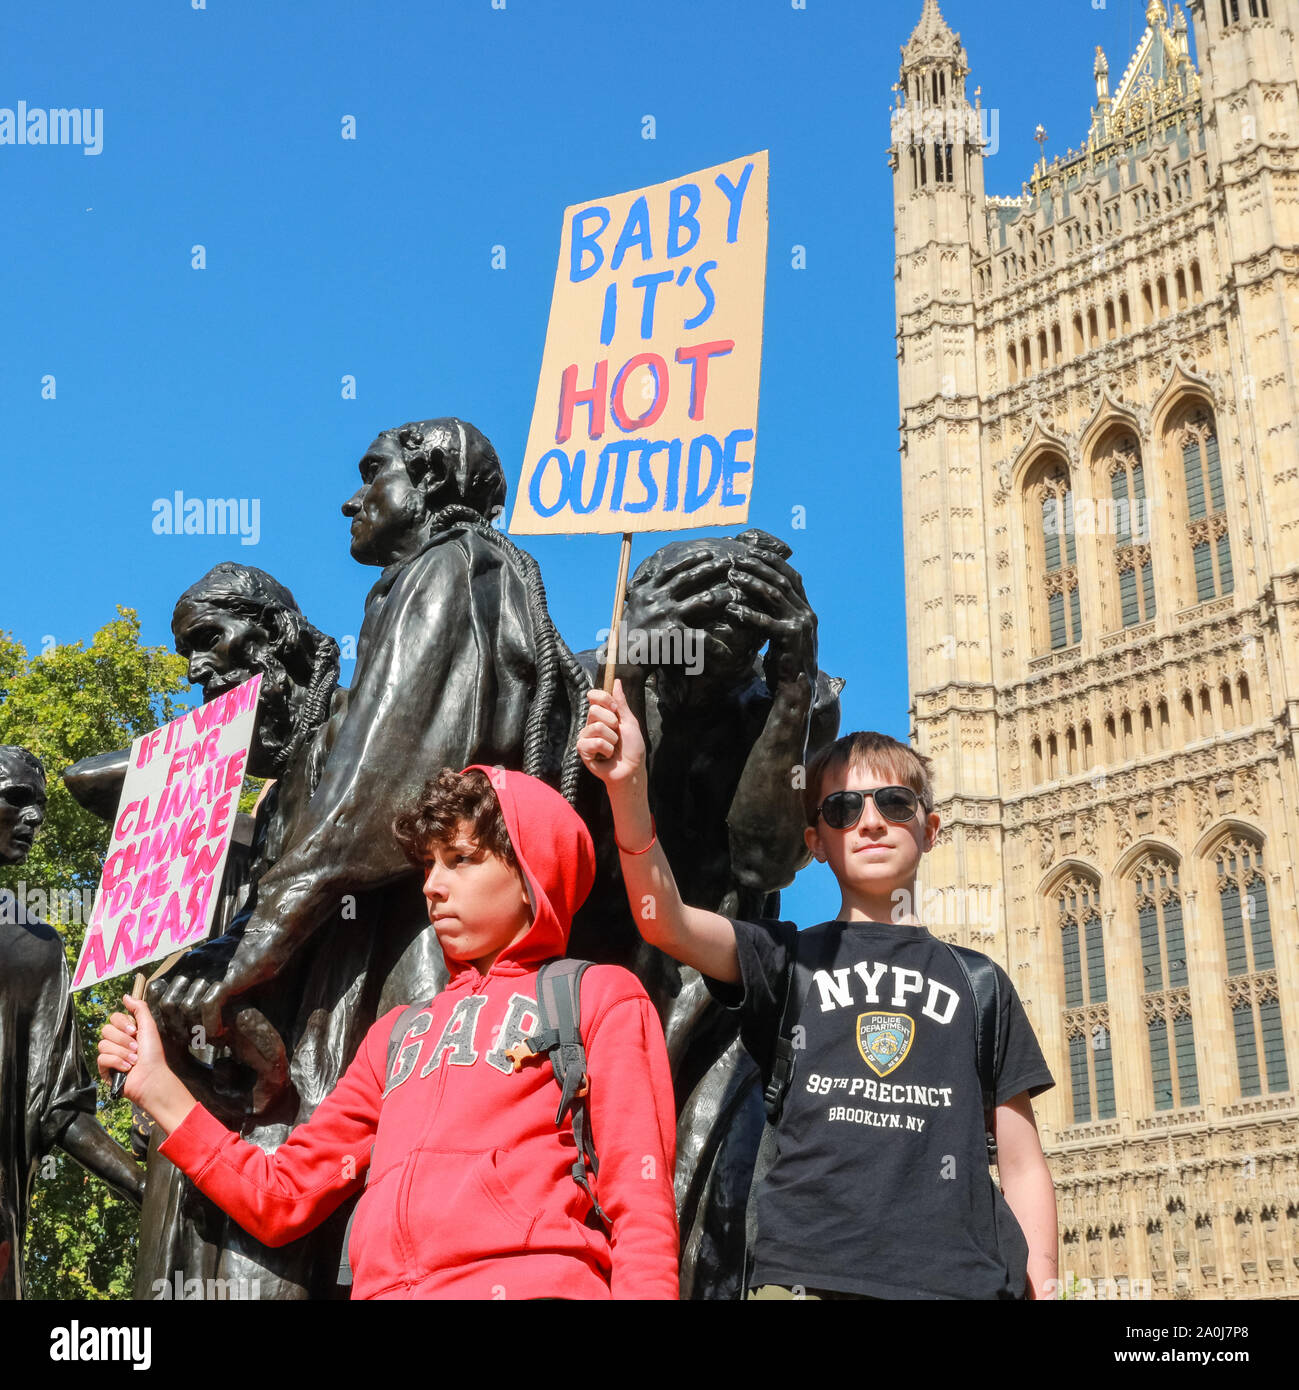 Westminster, London, UK, 20th Sep 2019. Children protest on the 'Burghers of Calais' statue by Rodin. Tens of thousands of children, young people and adults protest for climate action and against the causes of climate change in the British capital. Many similar protests take place in cities around the world in a day of global climate action in an event sparked by the young campaigner Greta Thunberg who attends the global climate strike in New York. Credit: Imageplotter/Alamy Live News Stock Photo